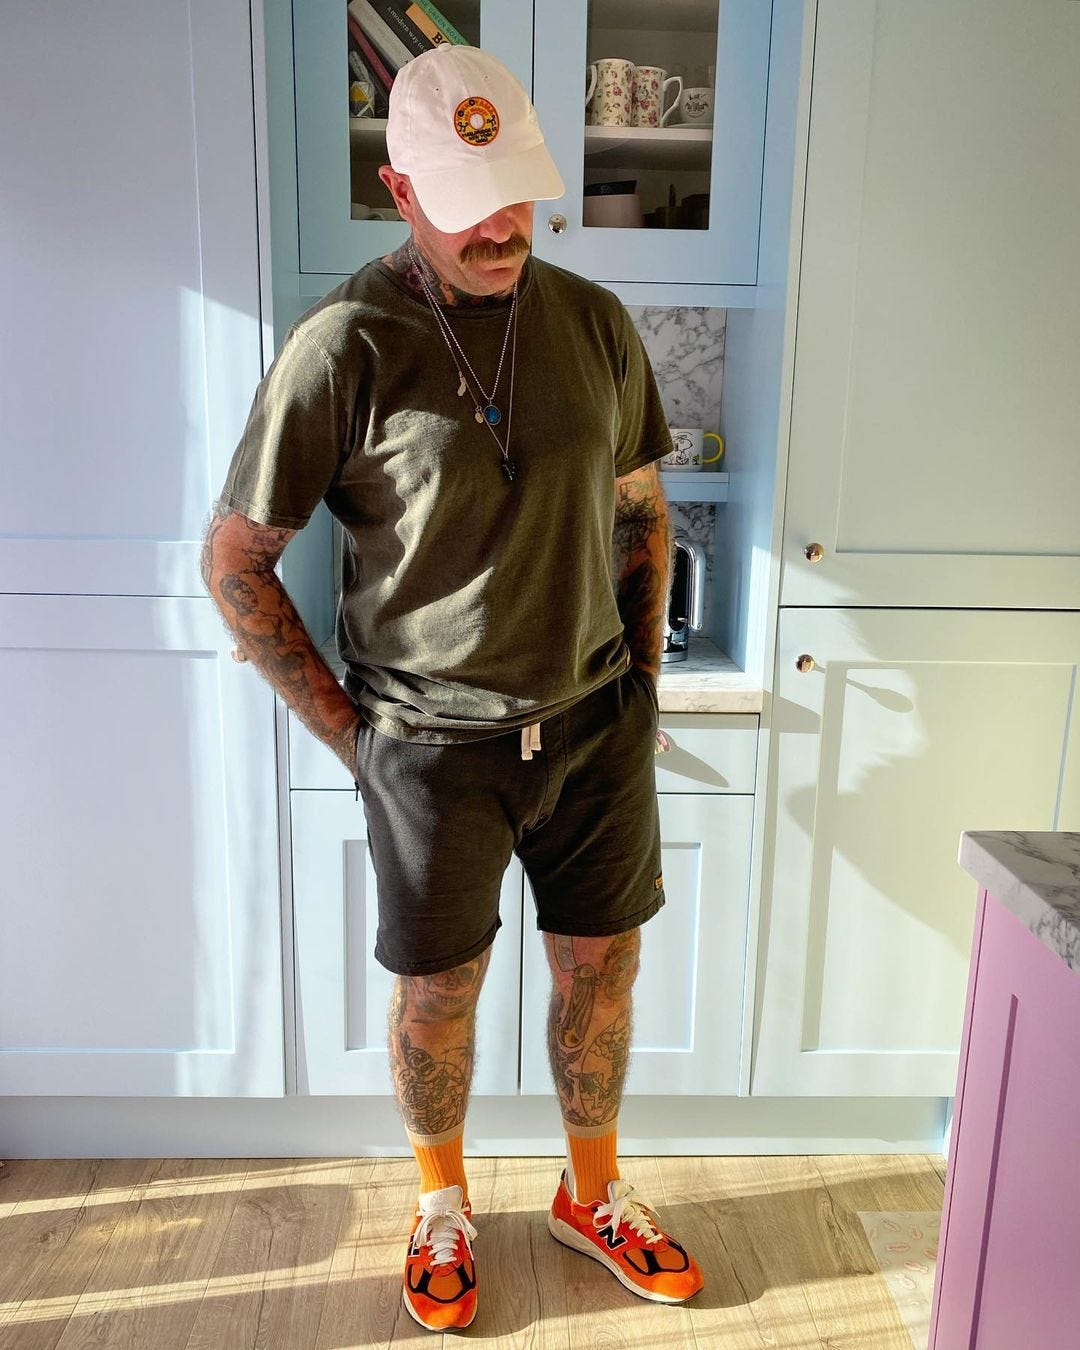 Man wearing high socks and shorts standing in kitchen